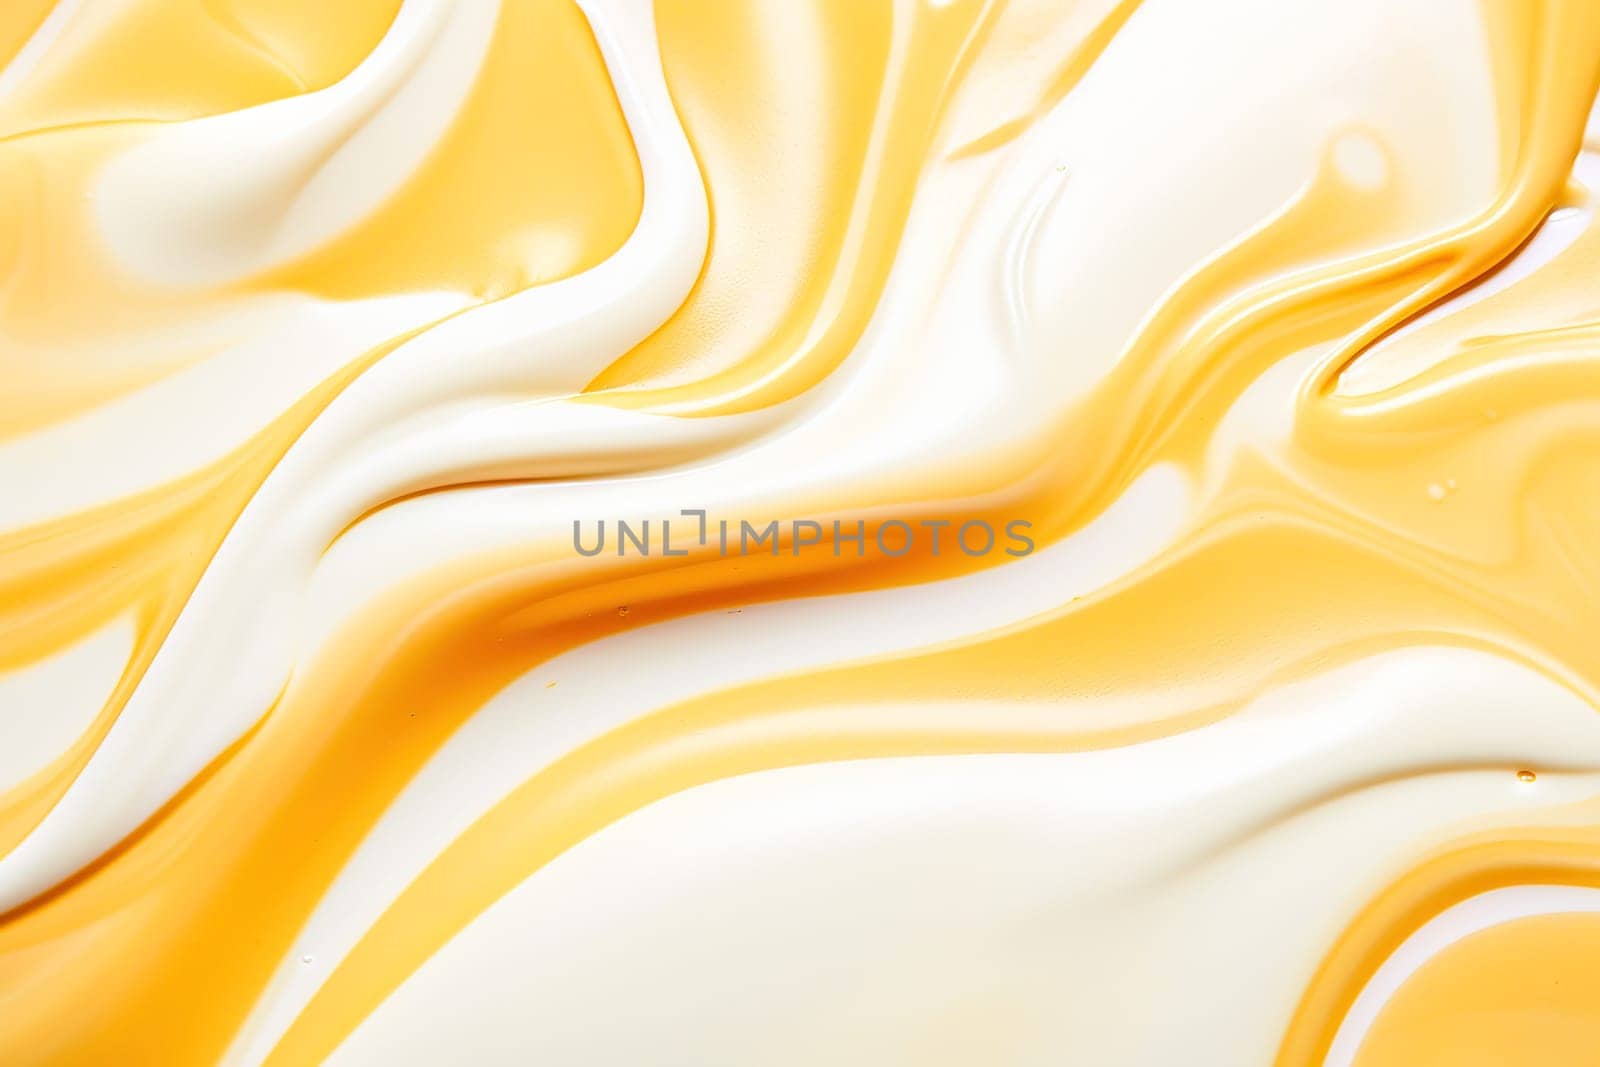 Whipped cream with caramel. High quality photo